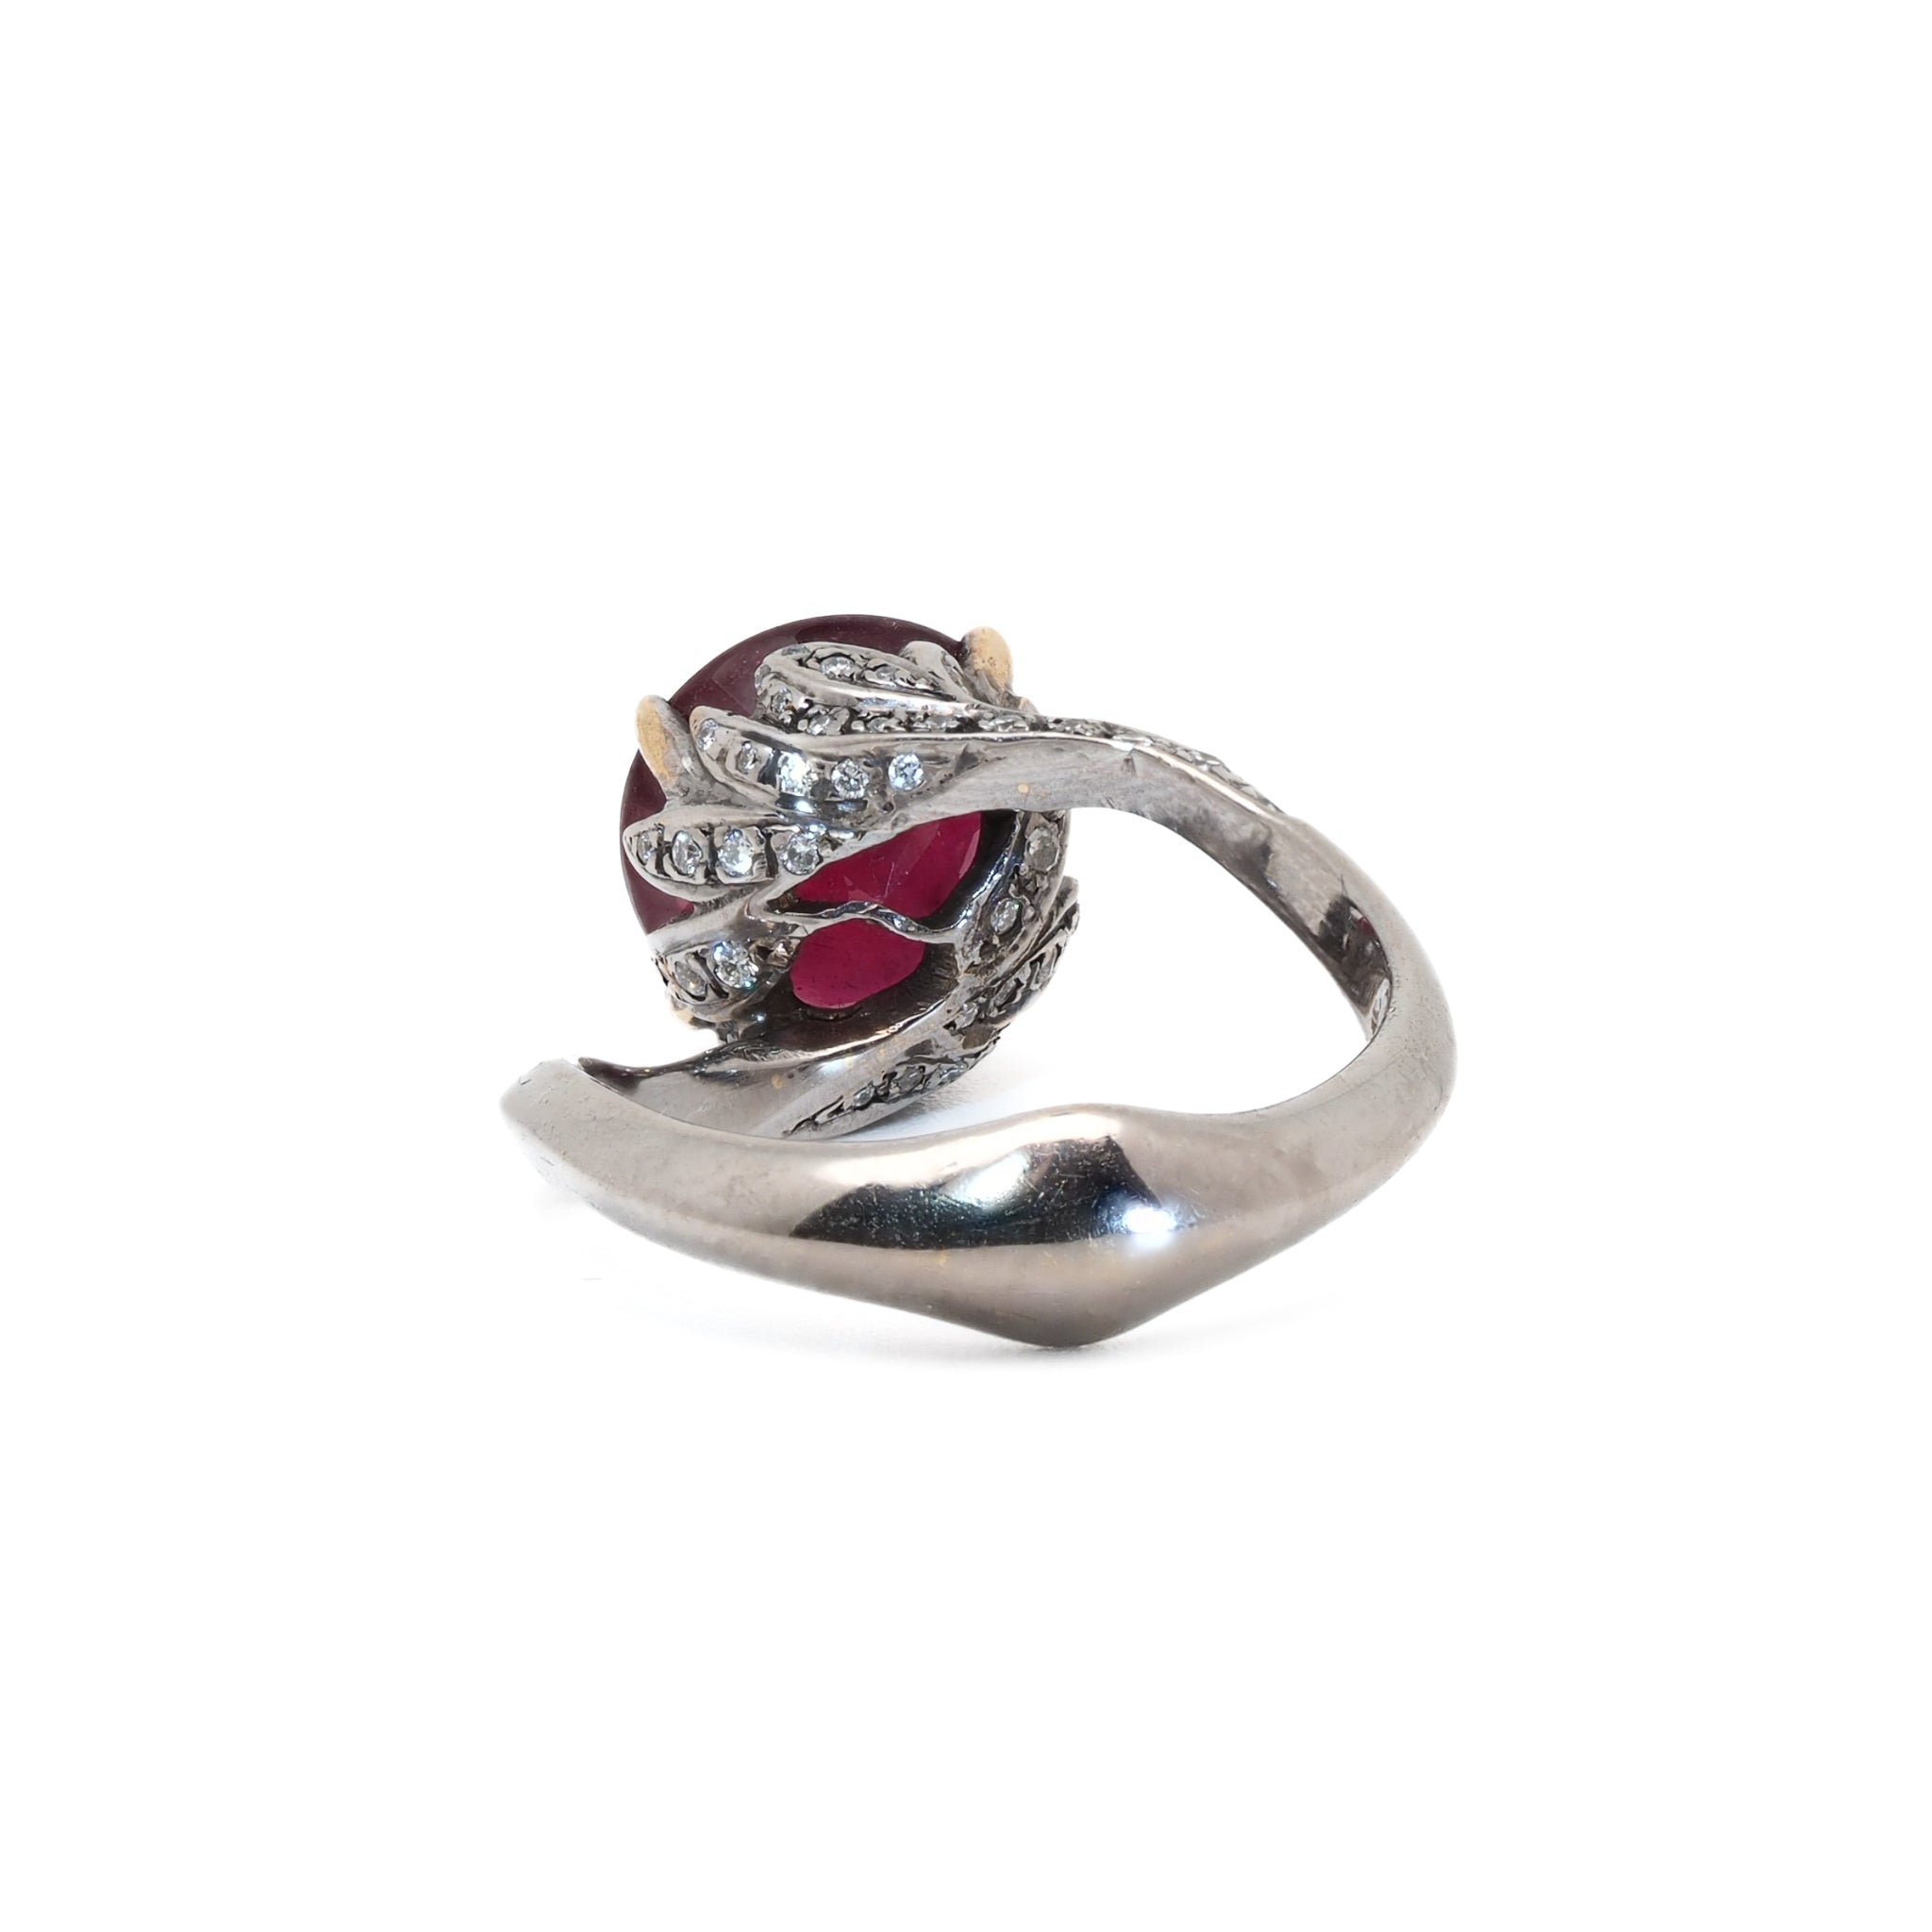 Ebru Jewelry Luxury Series - Unique Twisted Ruby Engagement Ring for a passionate symbol of love.